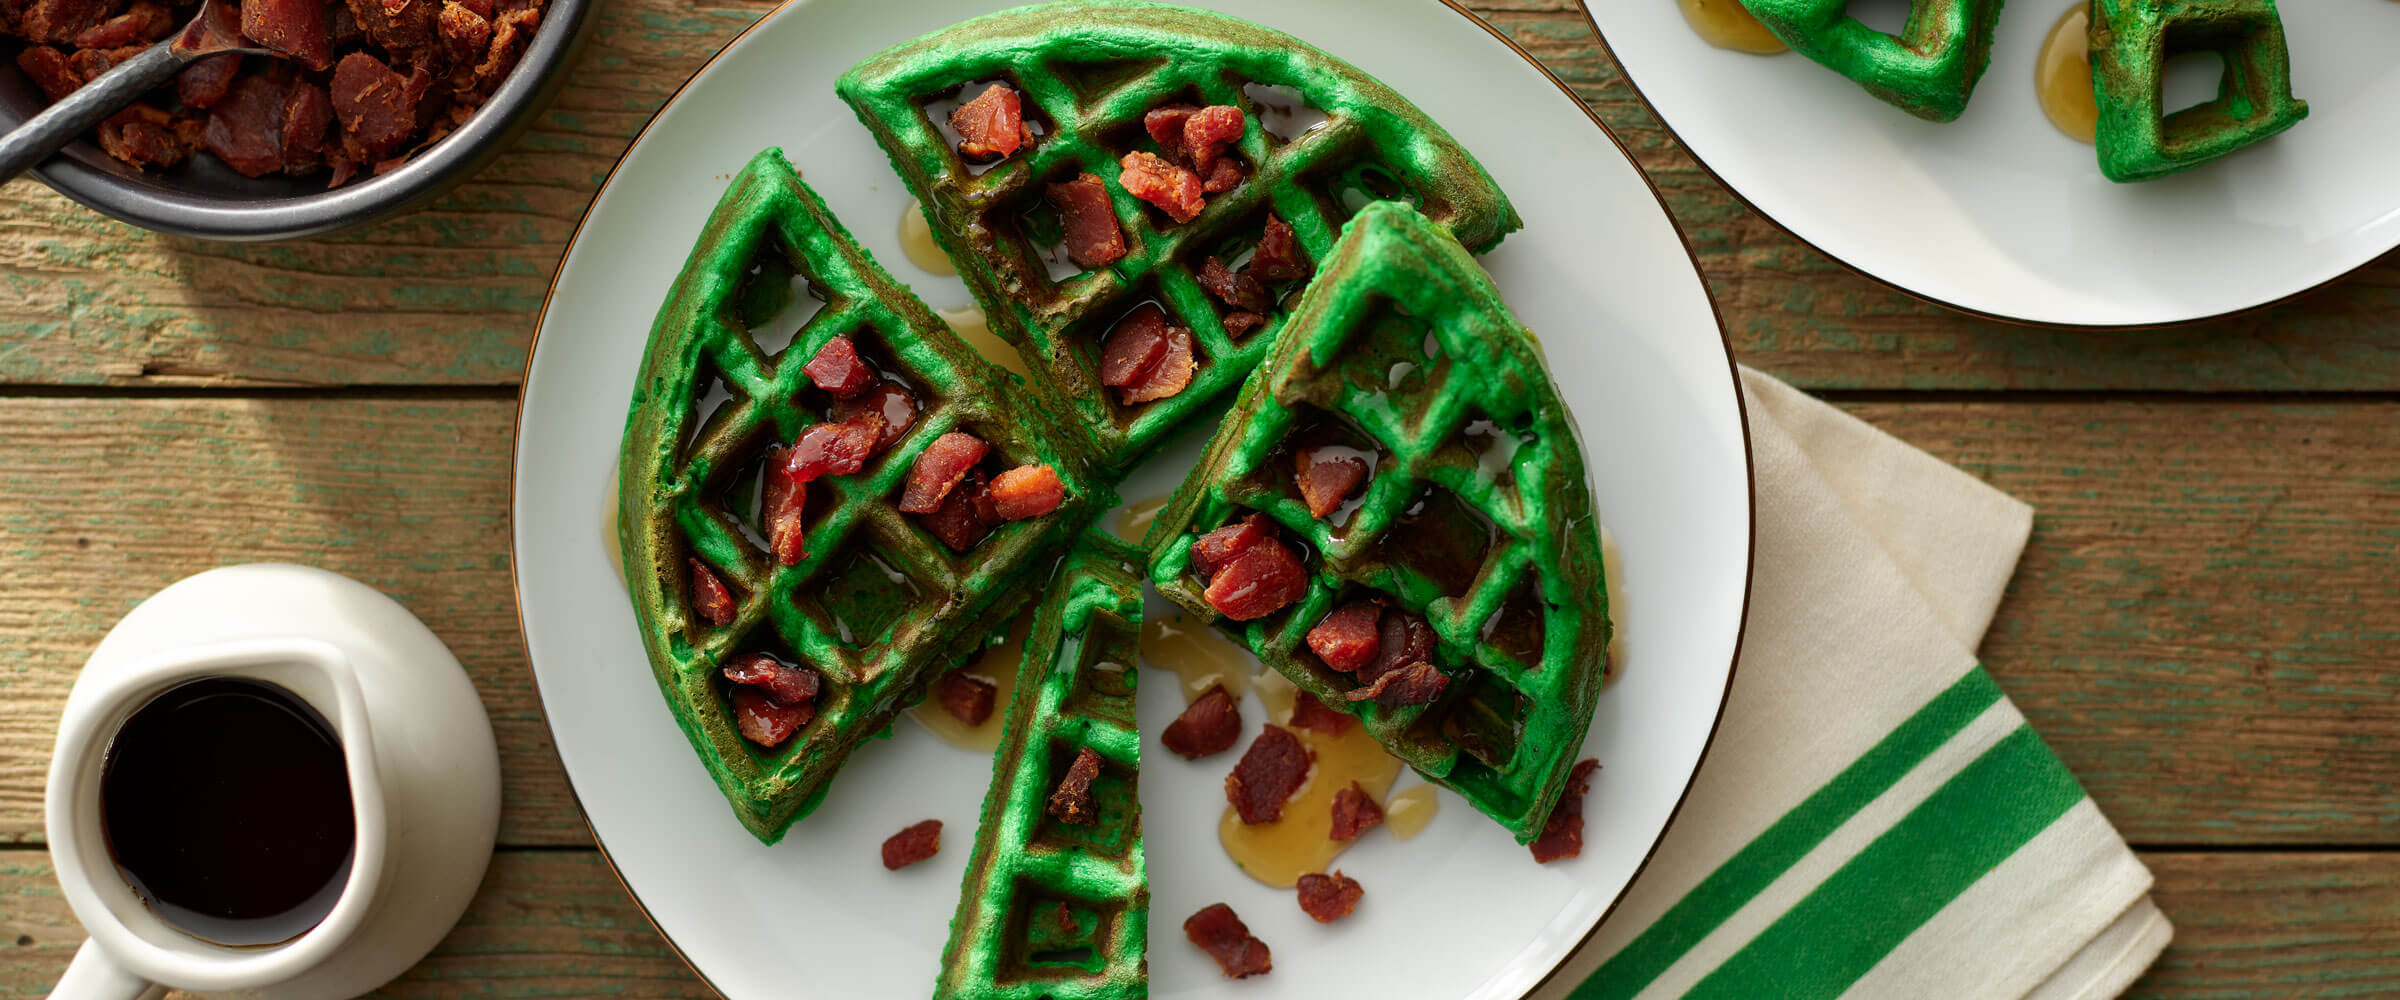 Green shamrock waffle and Bacon on white plate with extra syrup on side